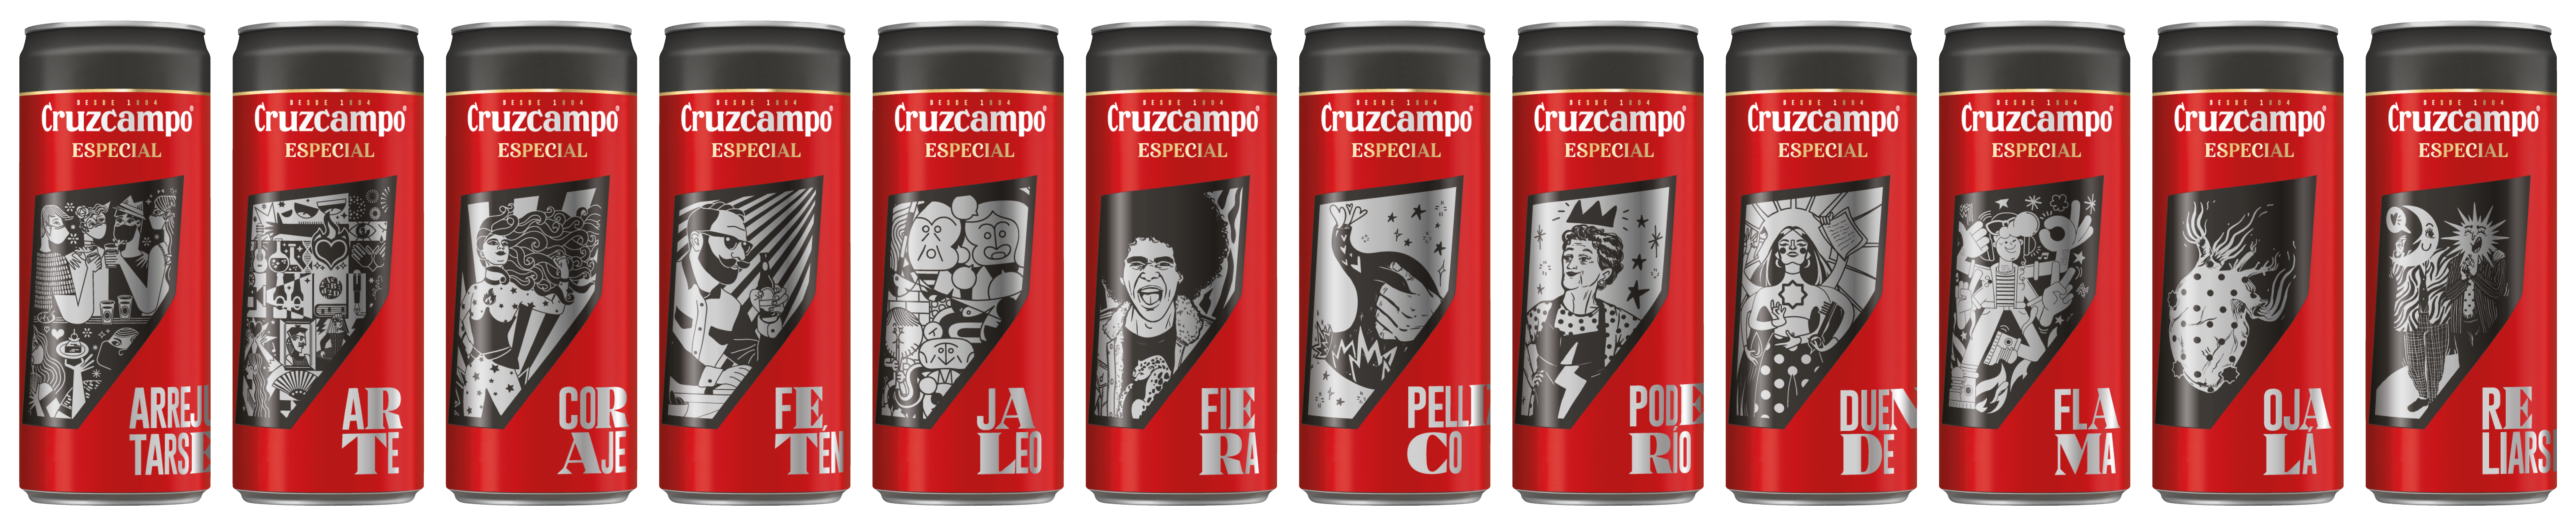 A row of Cruzcampo cans, which are red with black accents and greyscale artwork